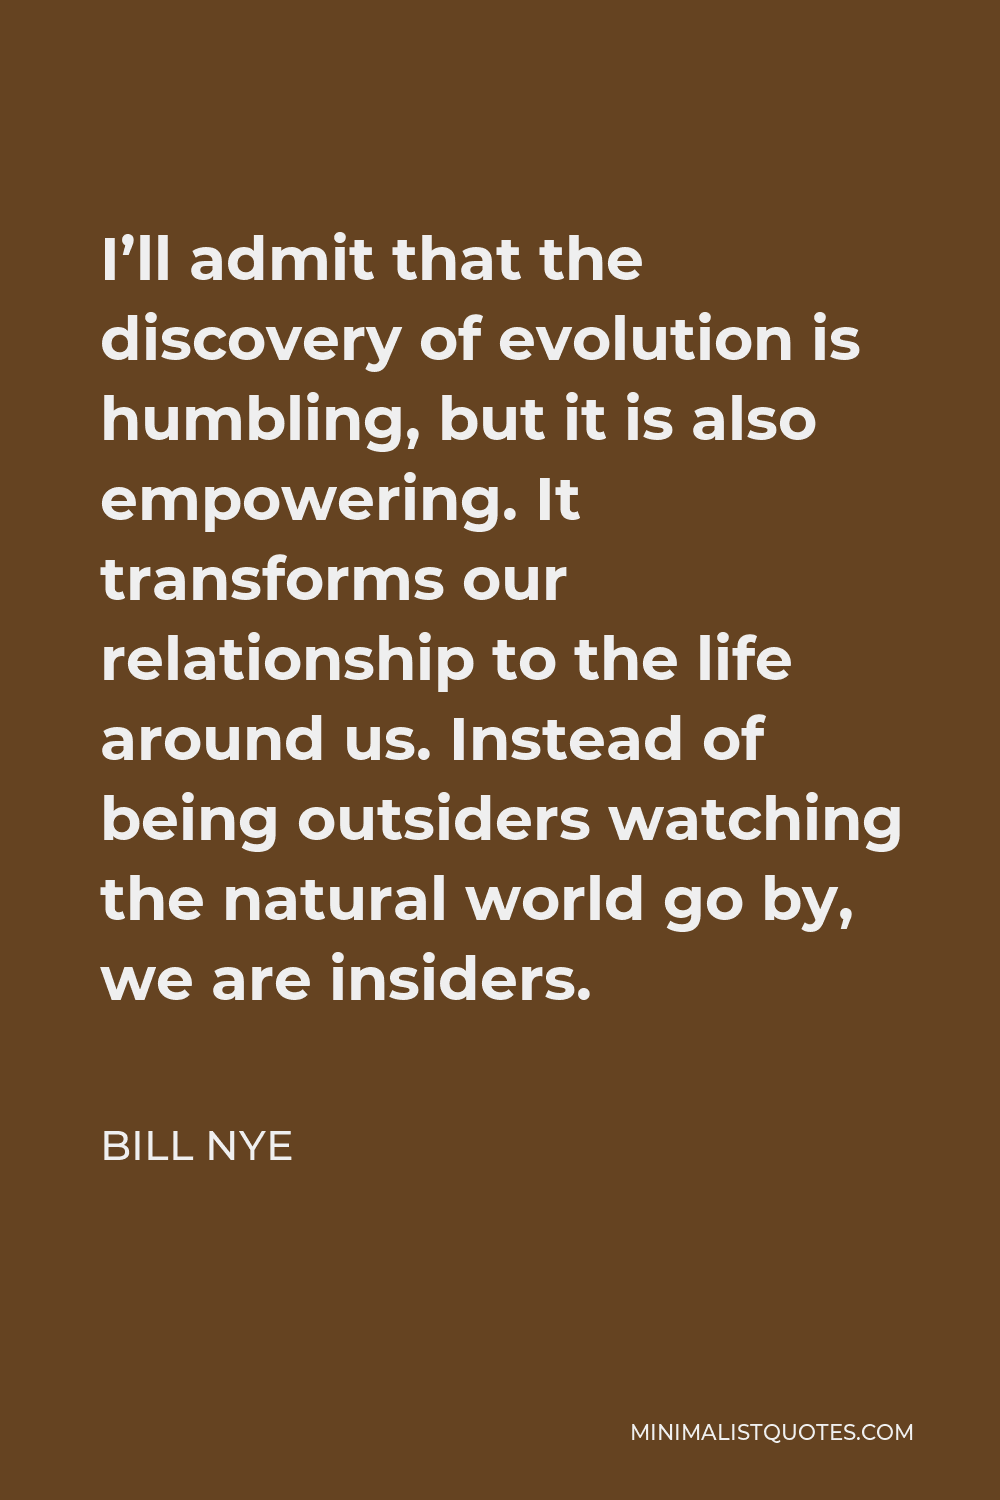 Bill Nye Quote - I’ll admit that the discovery of evolution is humbling, but it is also empowering. It transforms our relationship to the life around us. Instead of being outsiders watching the natural world go by, we are insiders.